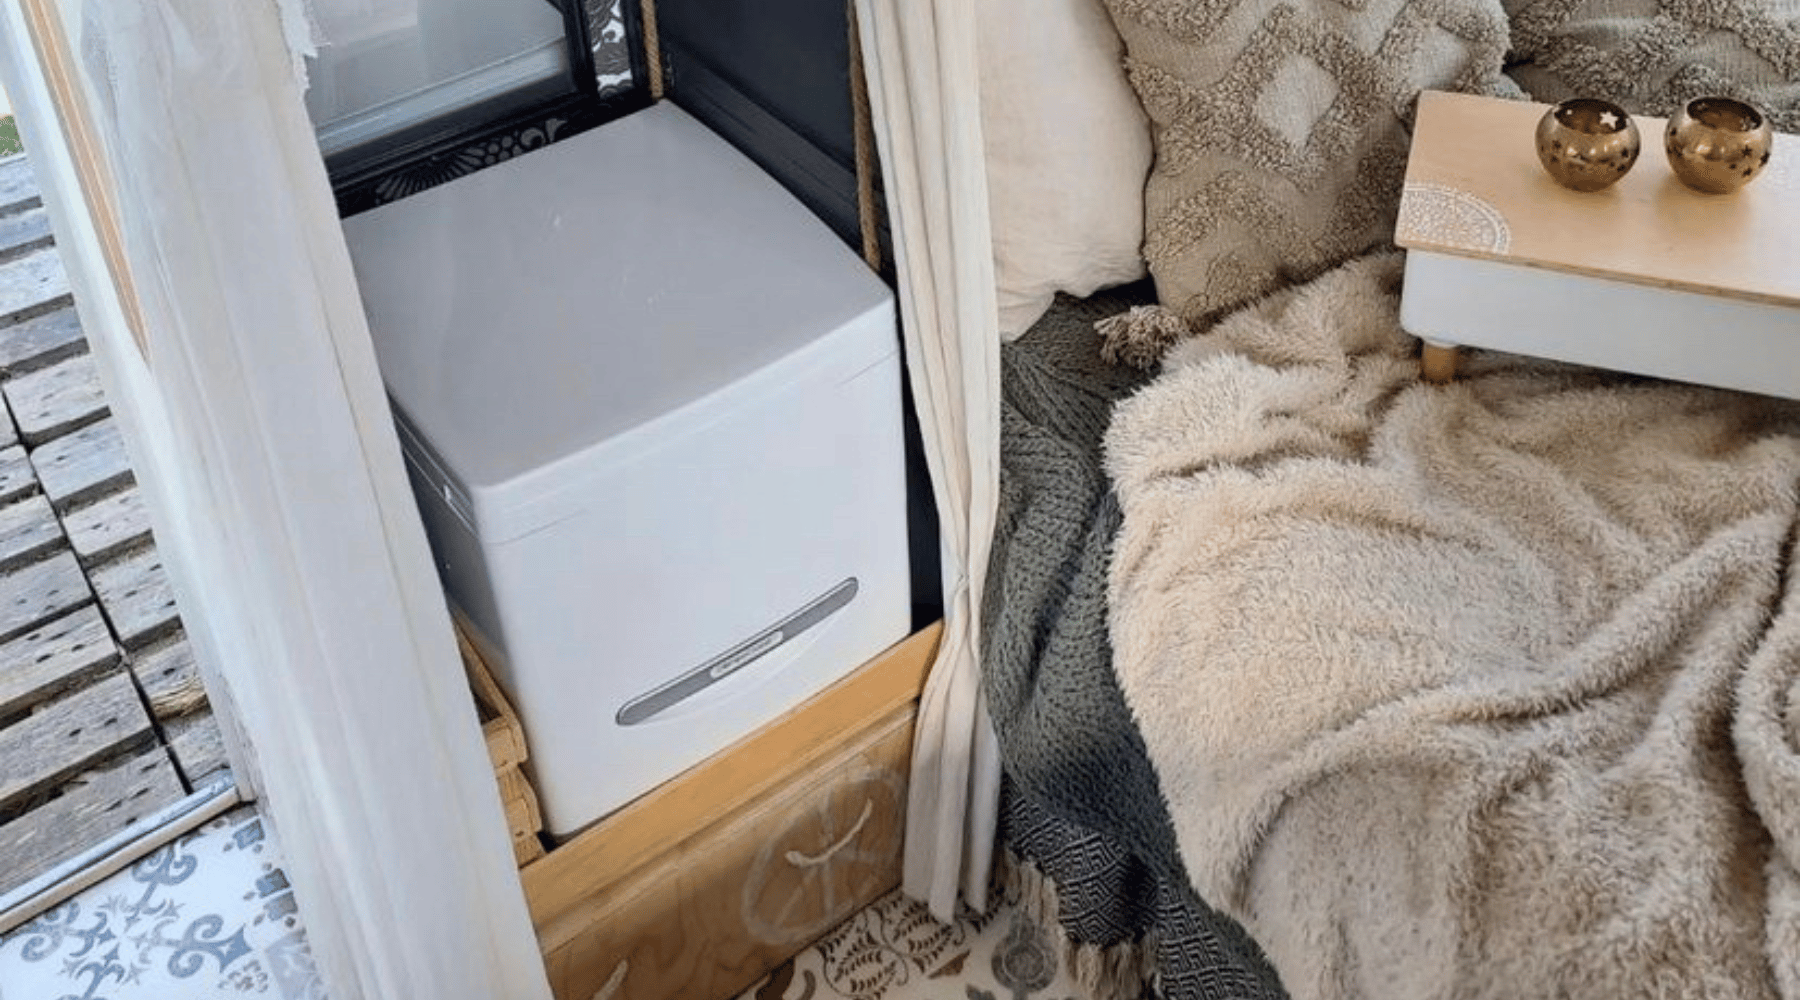 Compost Toilets for RVs Pros and Cons: What’s the Right Choice for You